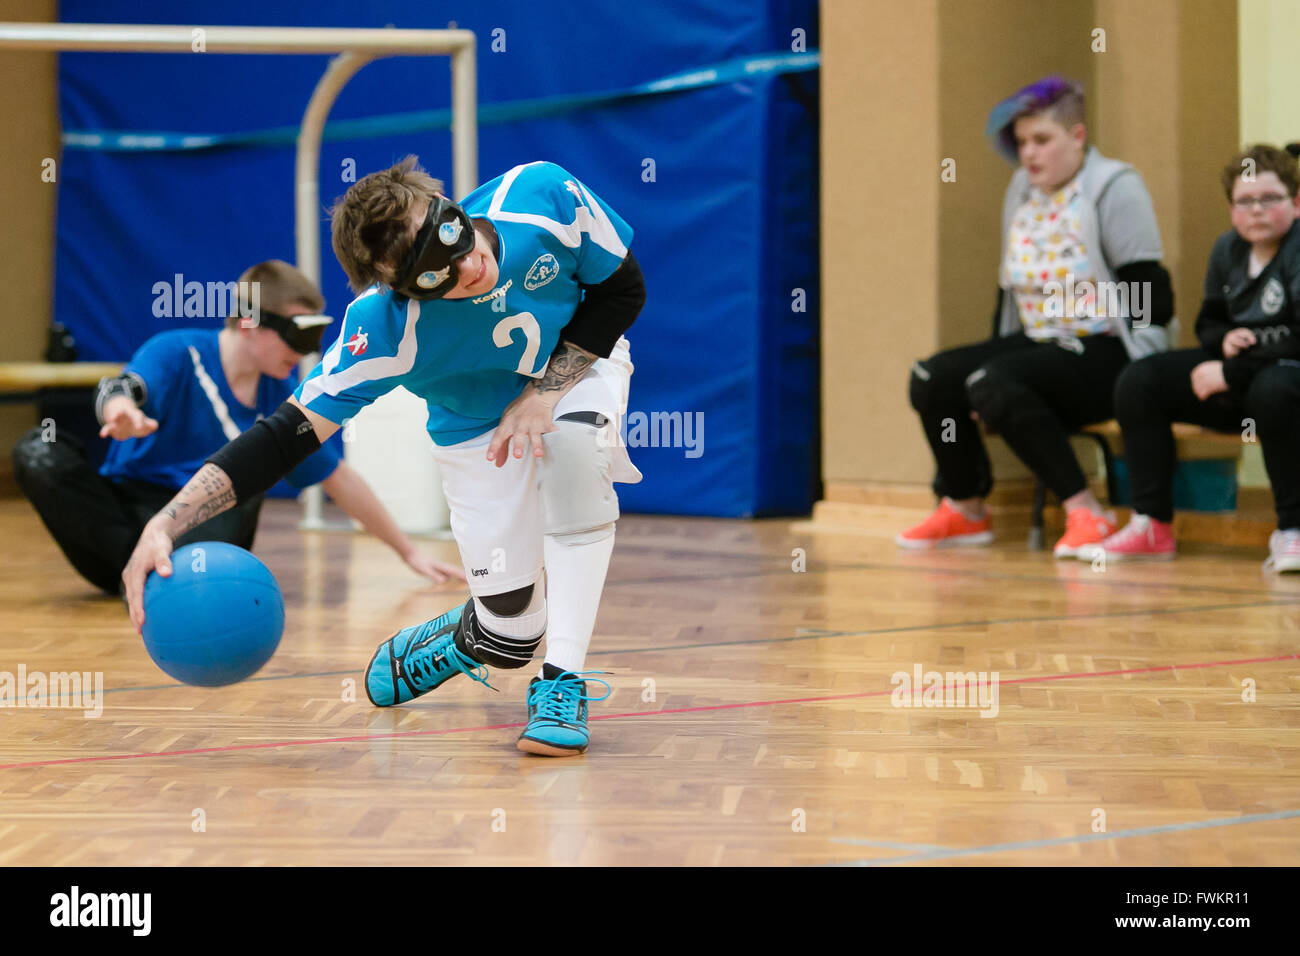 Visually impaired boy is playing Goalball Stock Photo